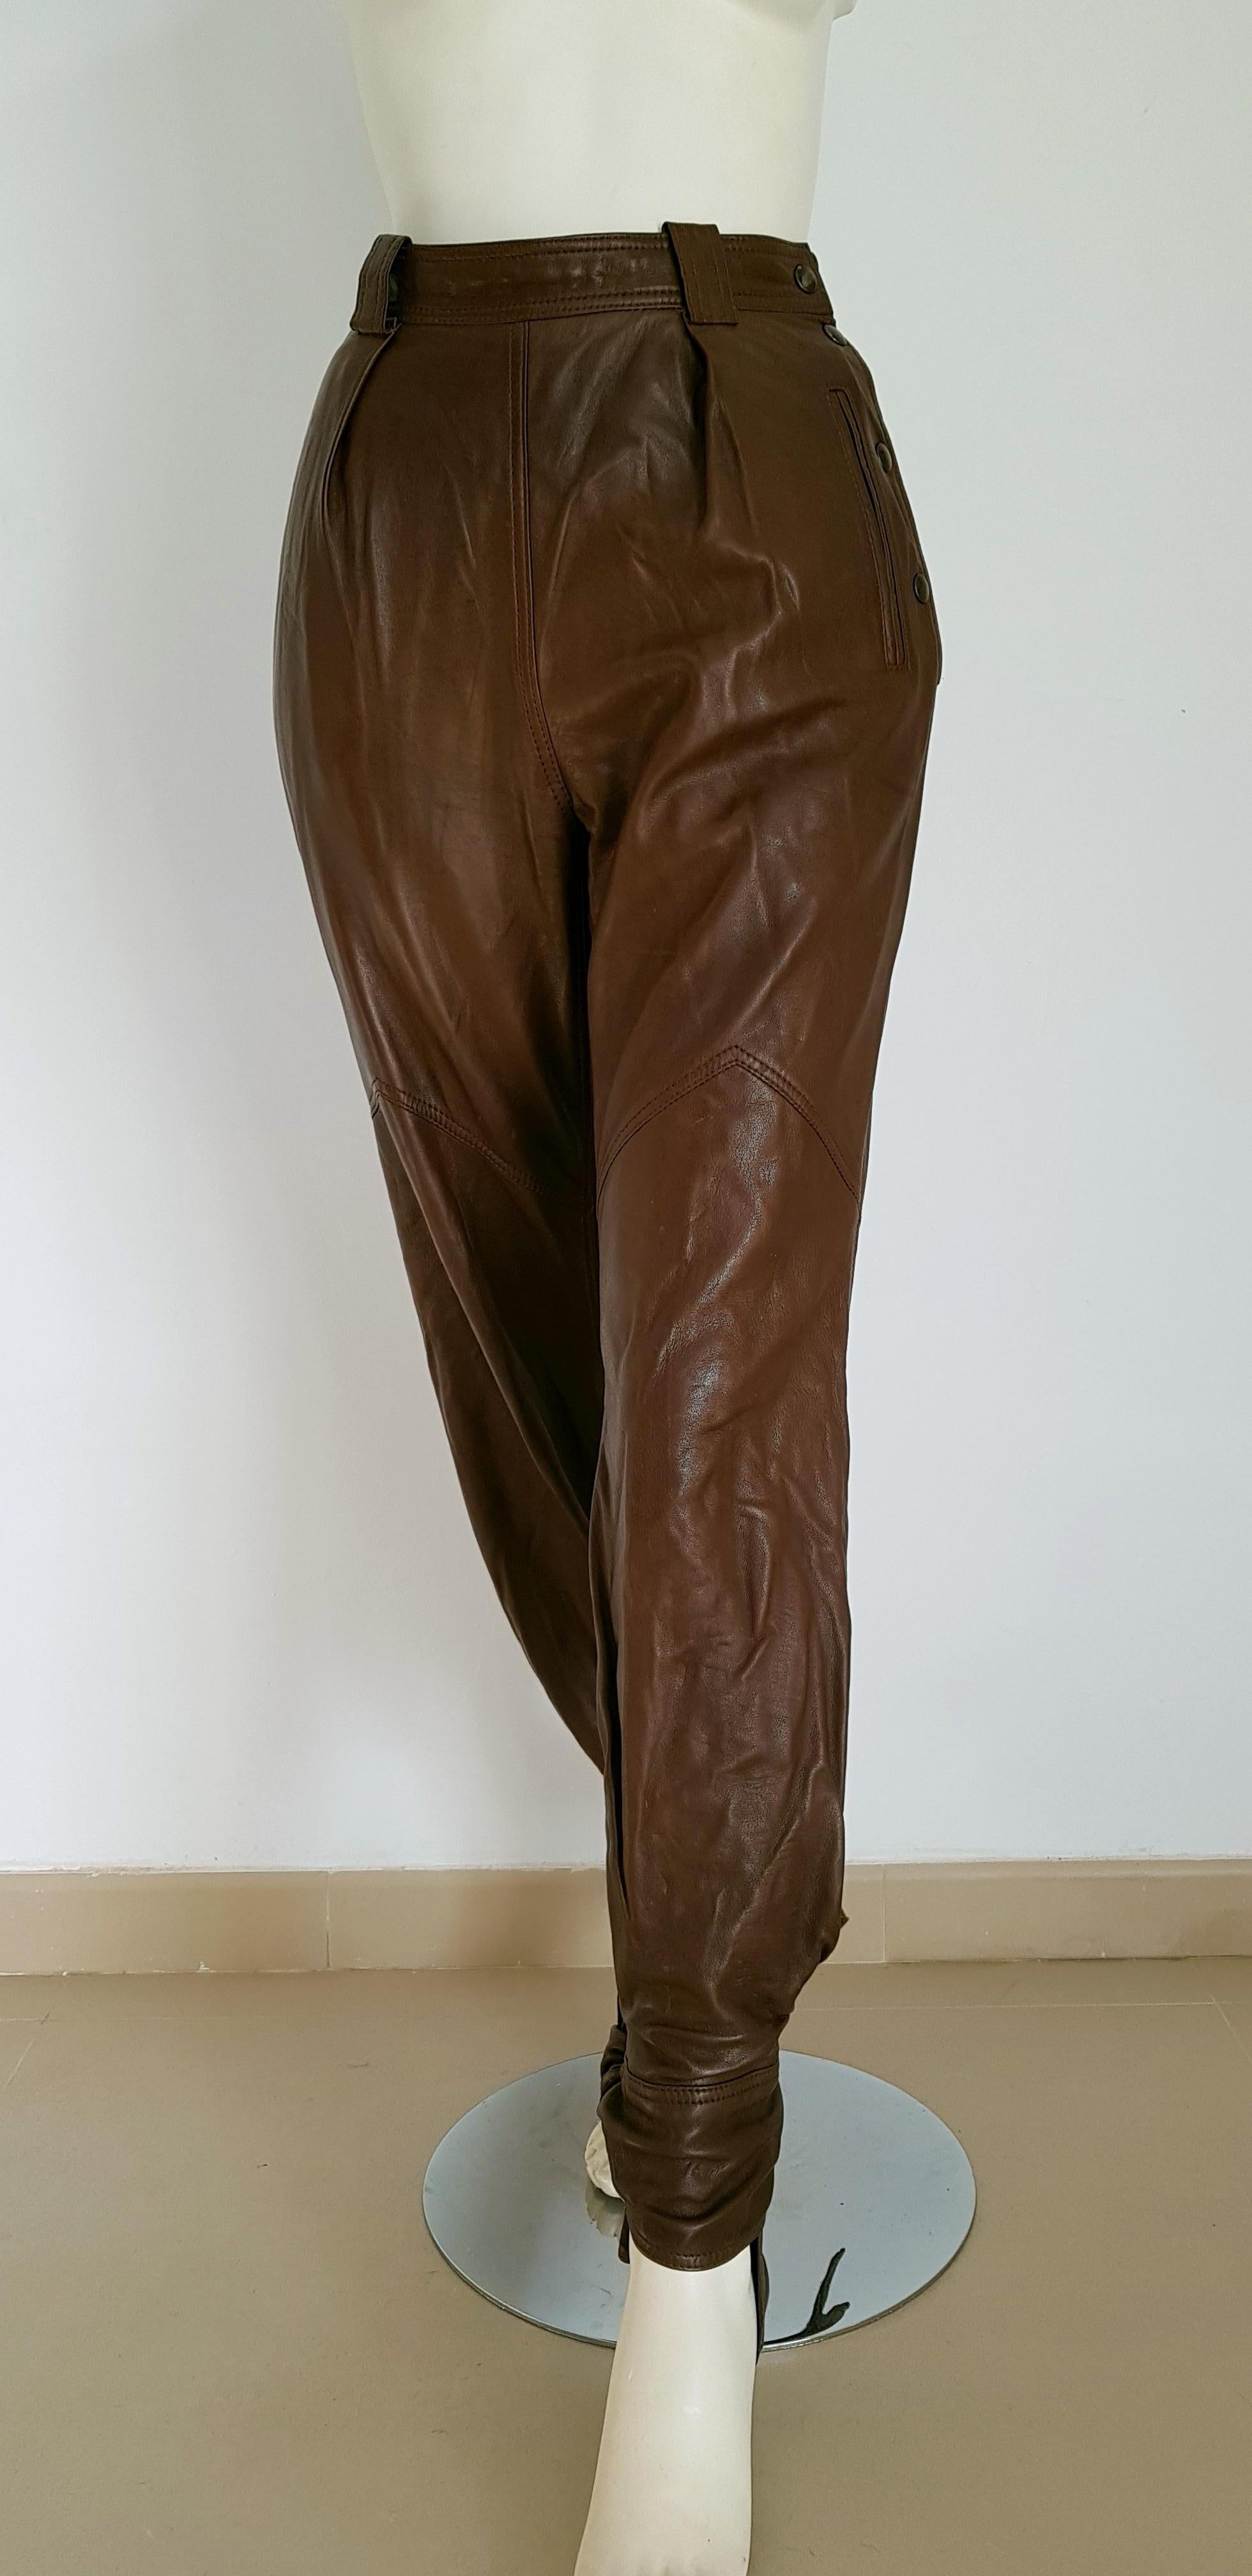 Anne Marie BERETTA Paris brown leather, up to under heel trousers - Unworn, New.

SIZE: equivalent to about Small / Medium, please review approx measurements as follows in cm.
PANTS: lenght 112, inseam length 80, waist circumference 68, hip